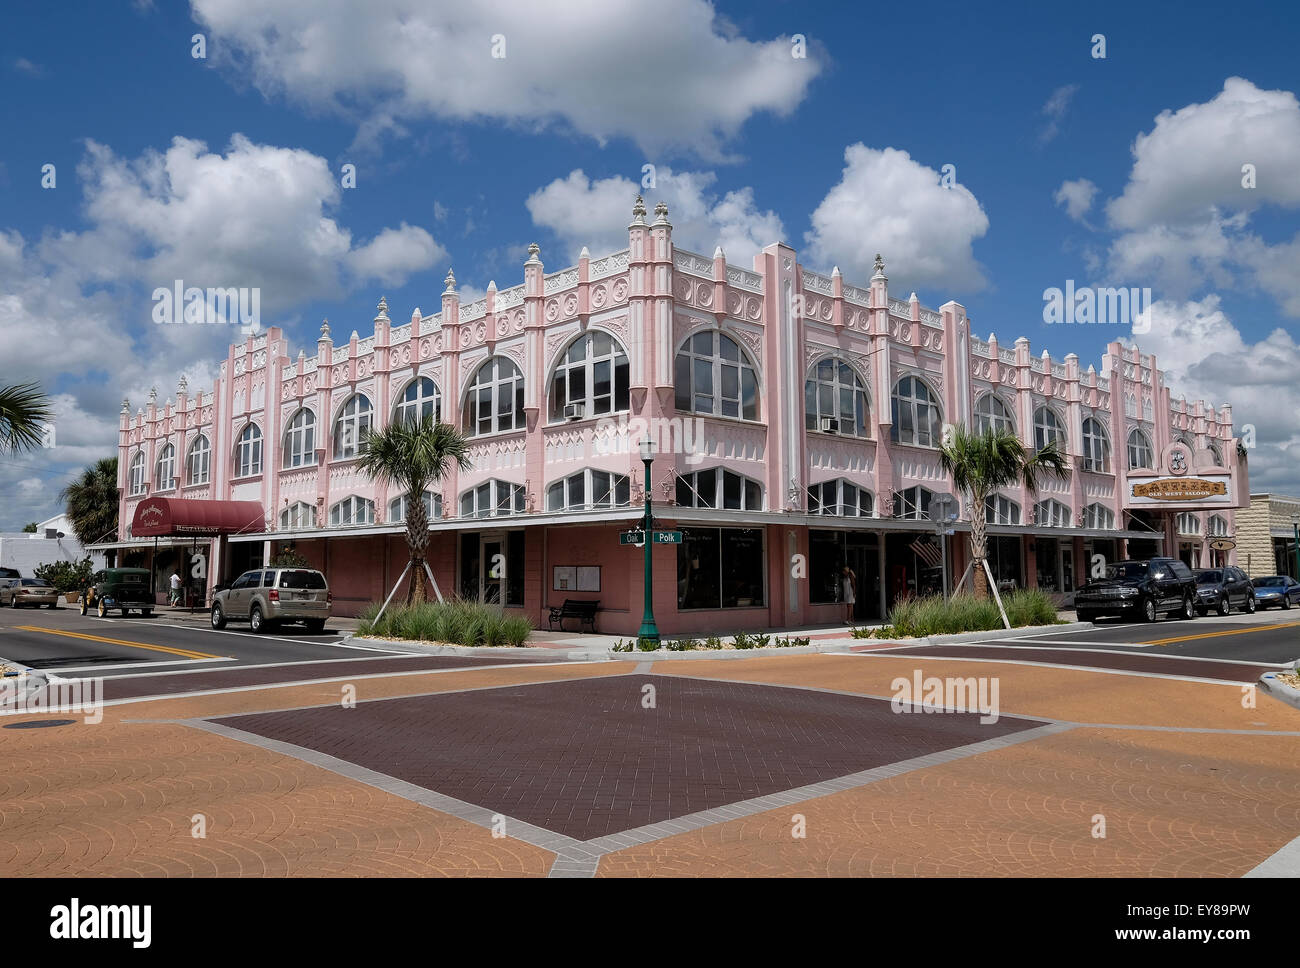 An old pink building in the town centre of Arcadia, Florida, United States of America. Stock Photo